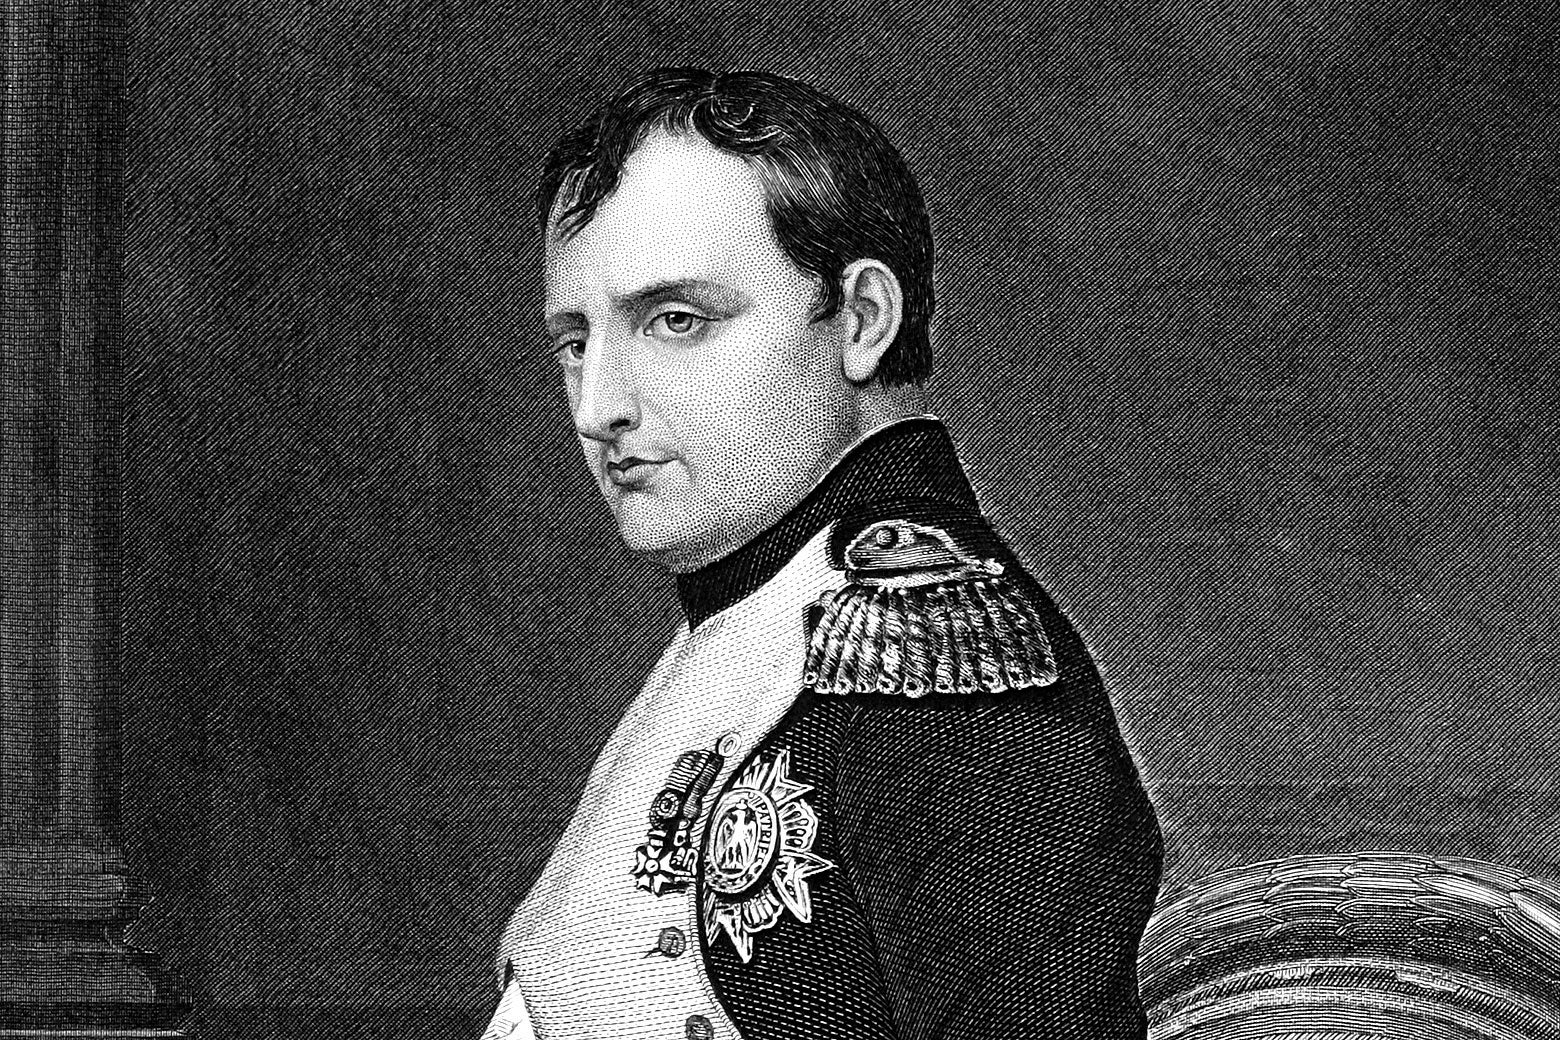 Was Napoleon Bonaparte Actually Hot? Historians Have Some Intriguing Evidence. Luke Winkie